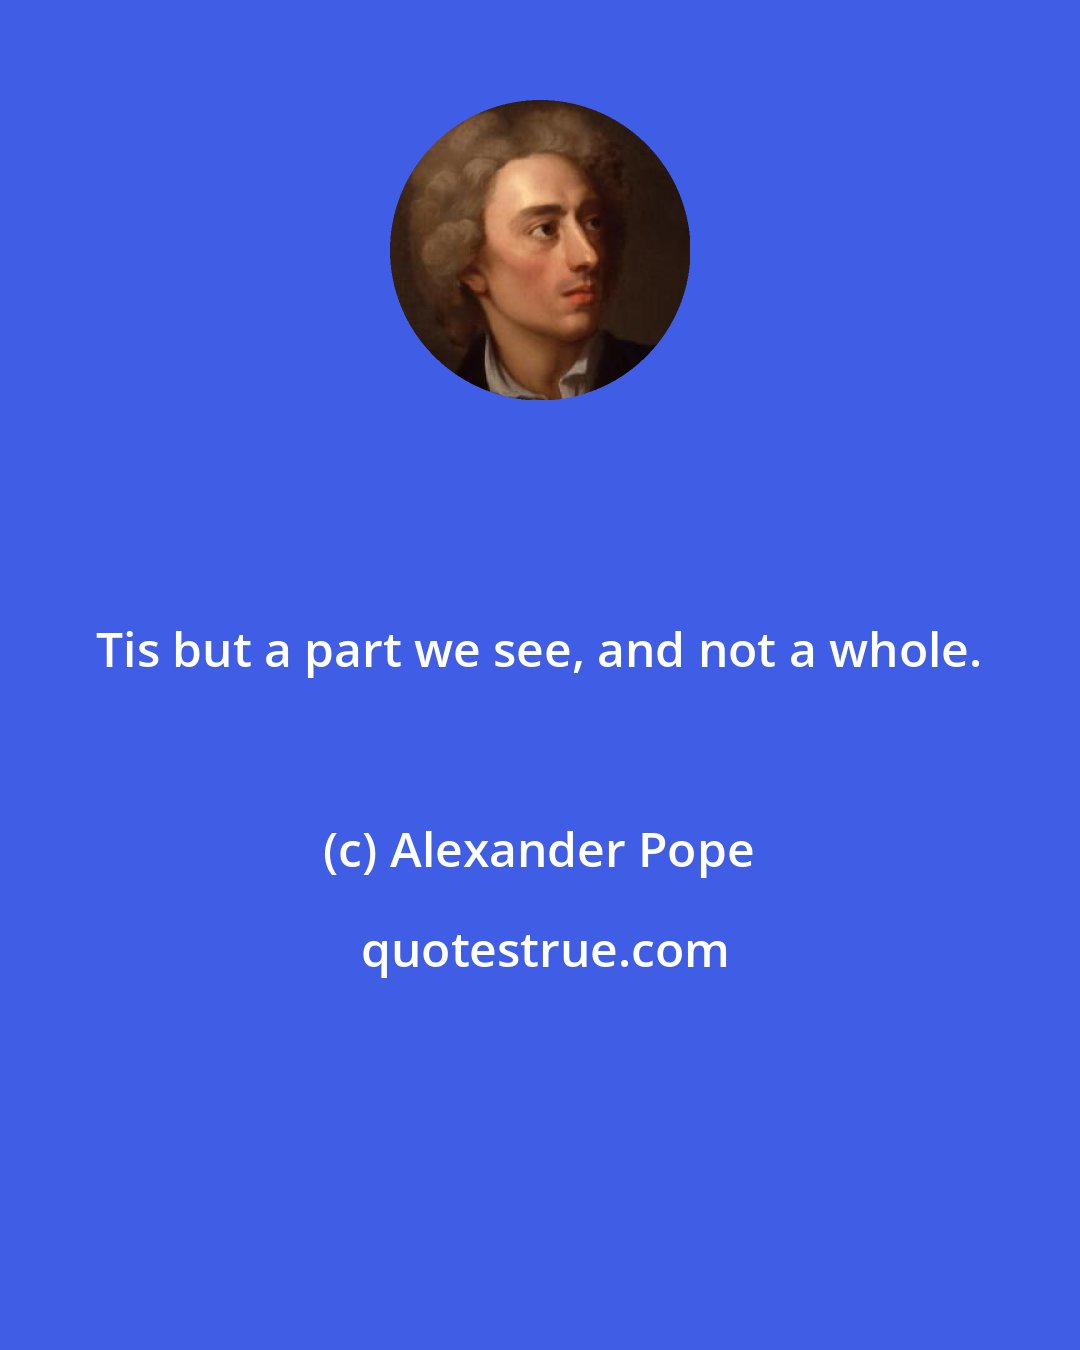 Alexander Pope: Tis but a part we see, and not a whole.